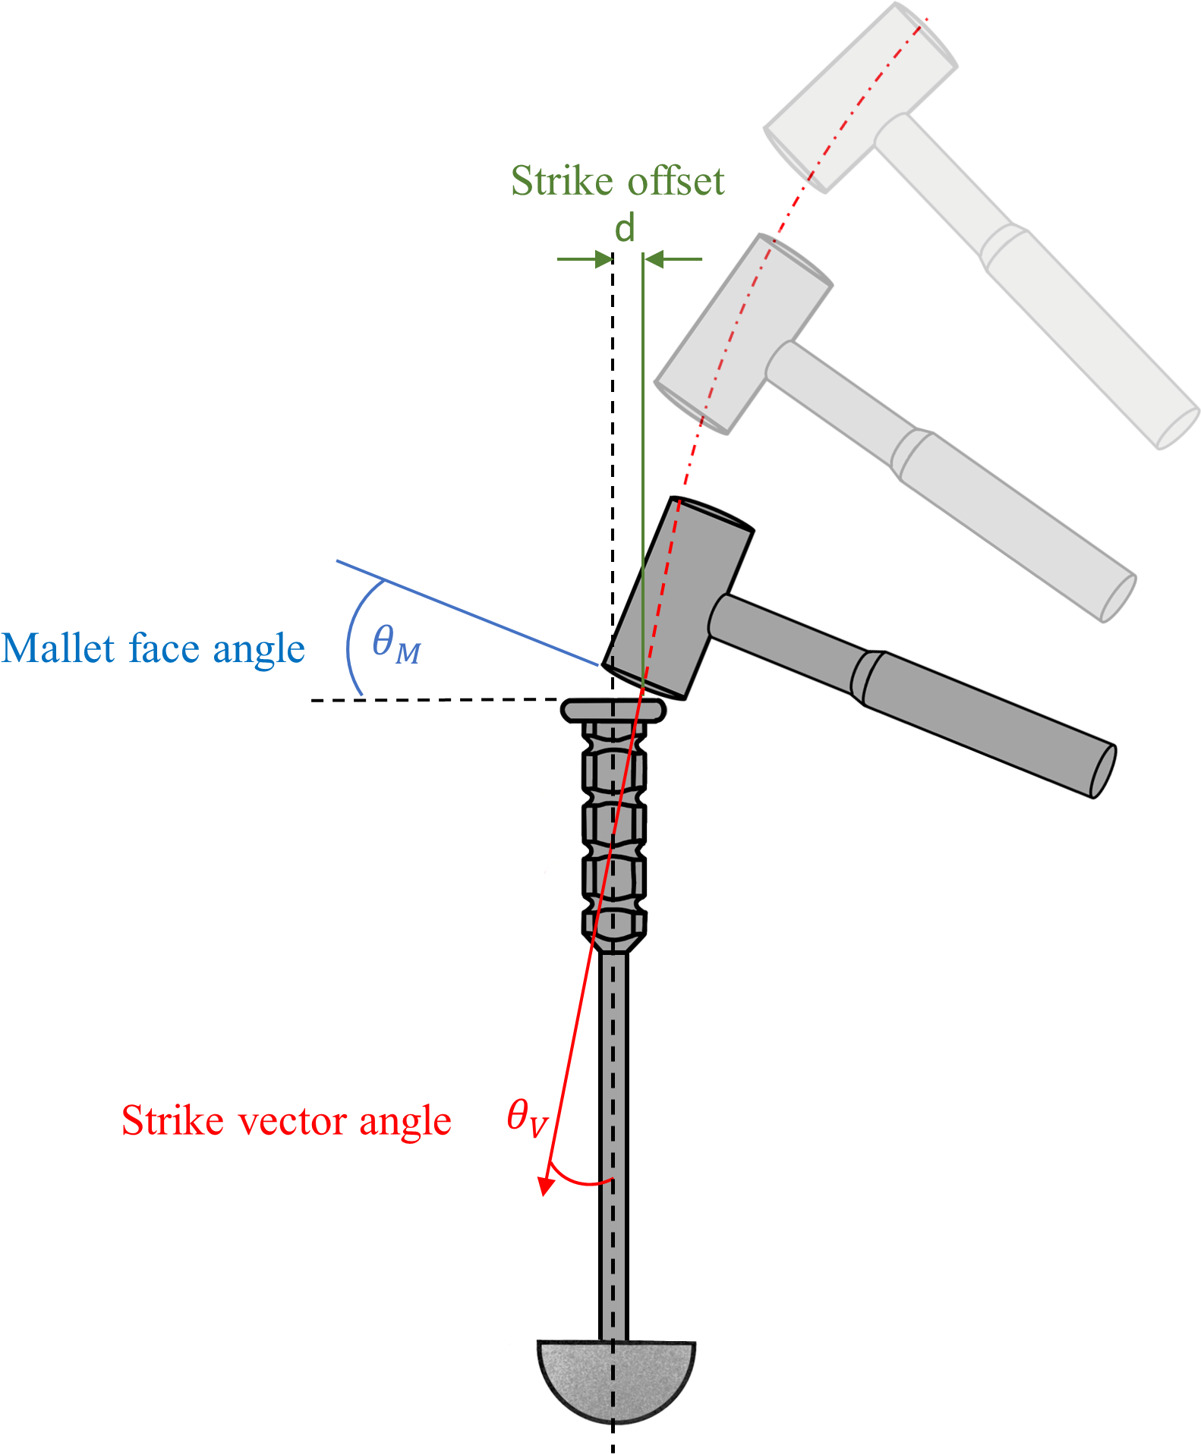 Fig. 2 
            Three strike parameters were measured in post-study analysis of the motion capture data. Strike vector angle, strike offset, and mallet face angle.
          